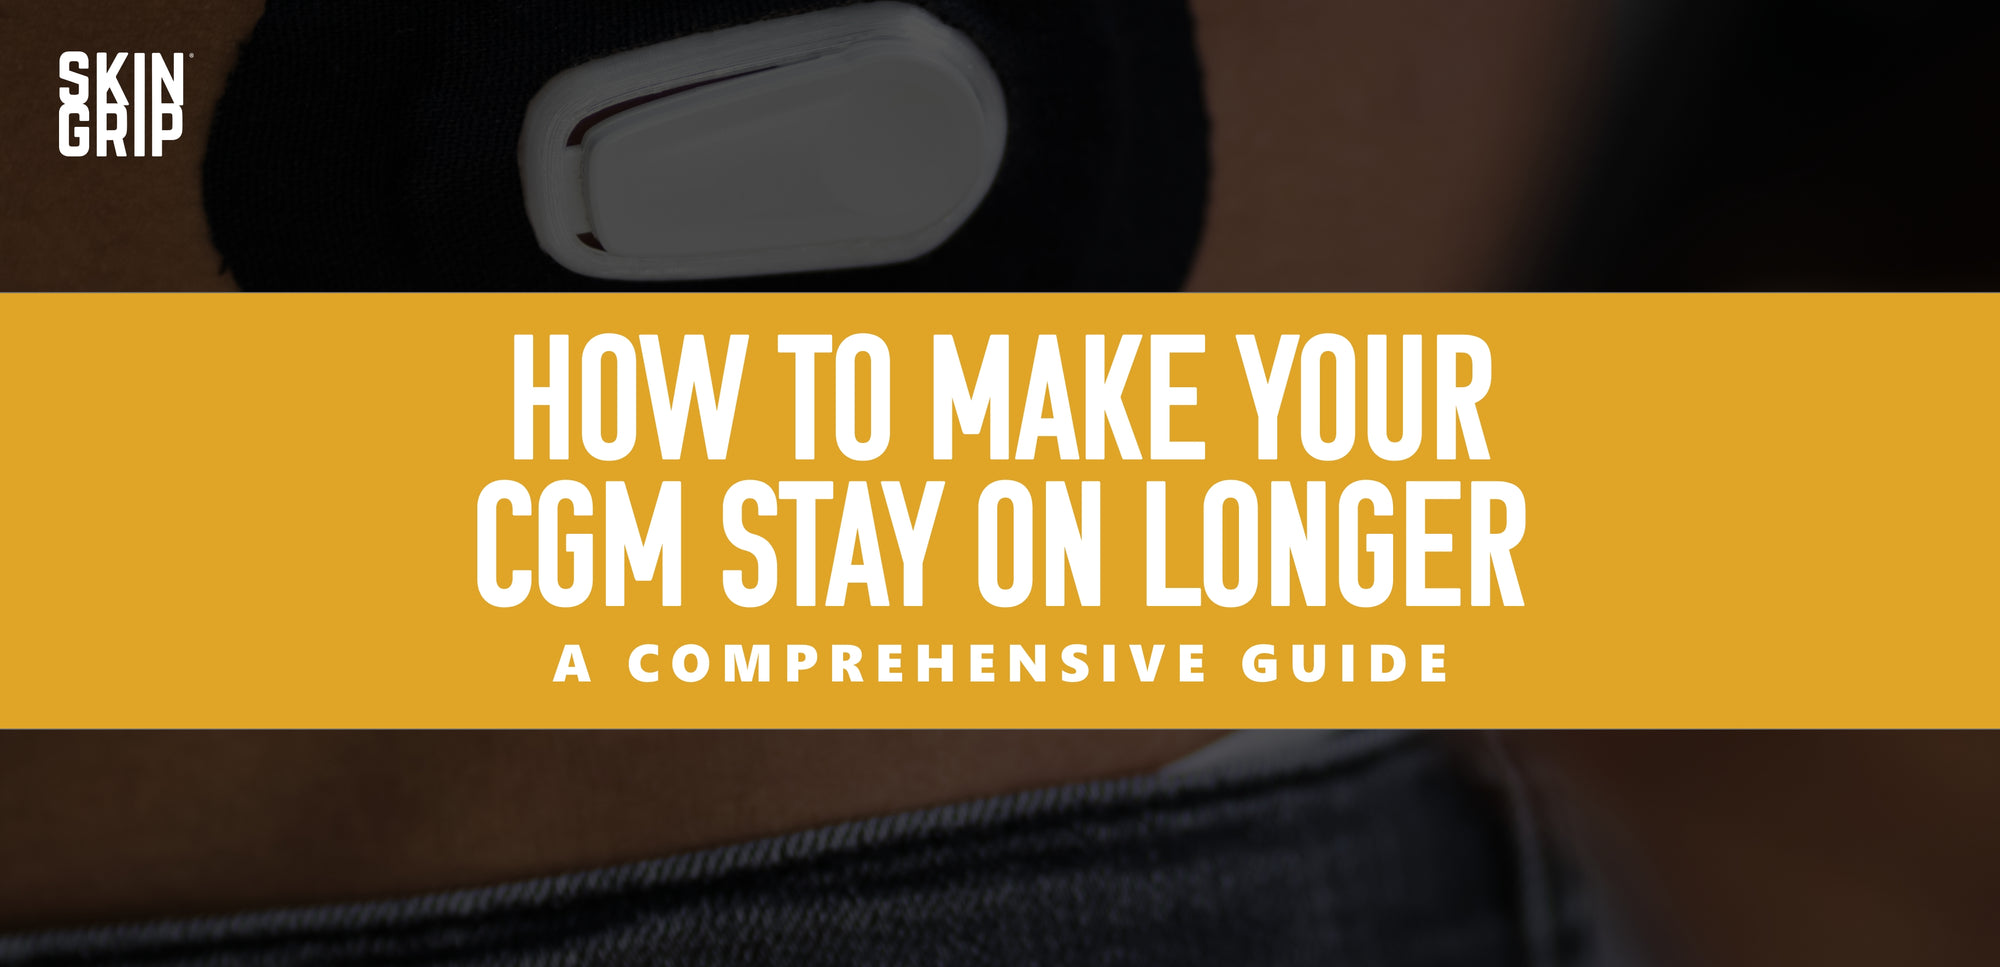 How to Make Your CGM Stay on Longer: A Comprehensive Guide